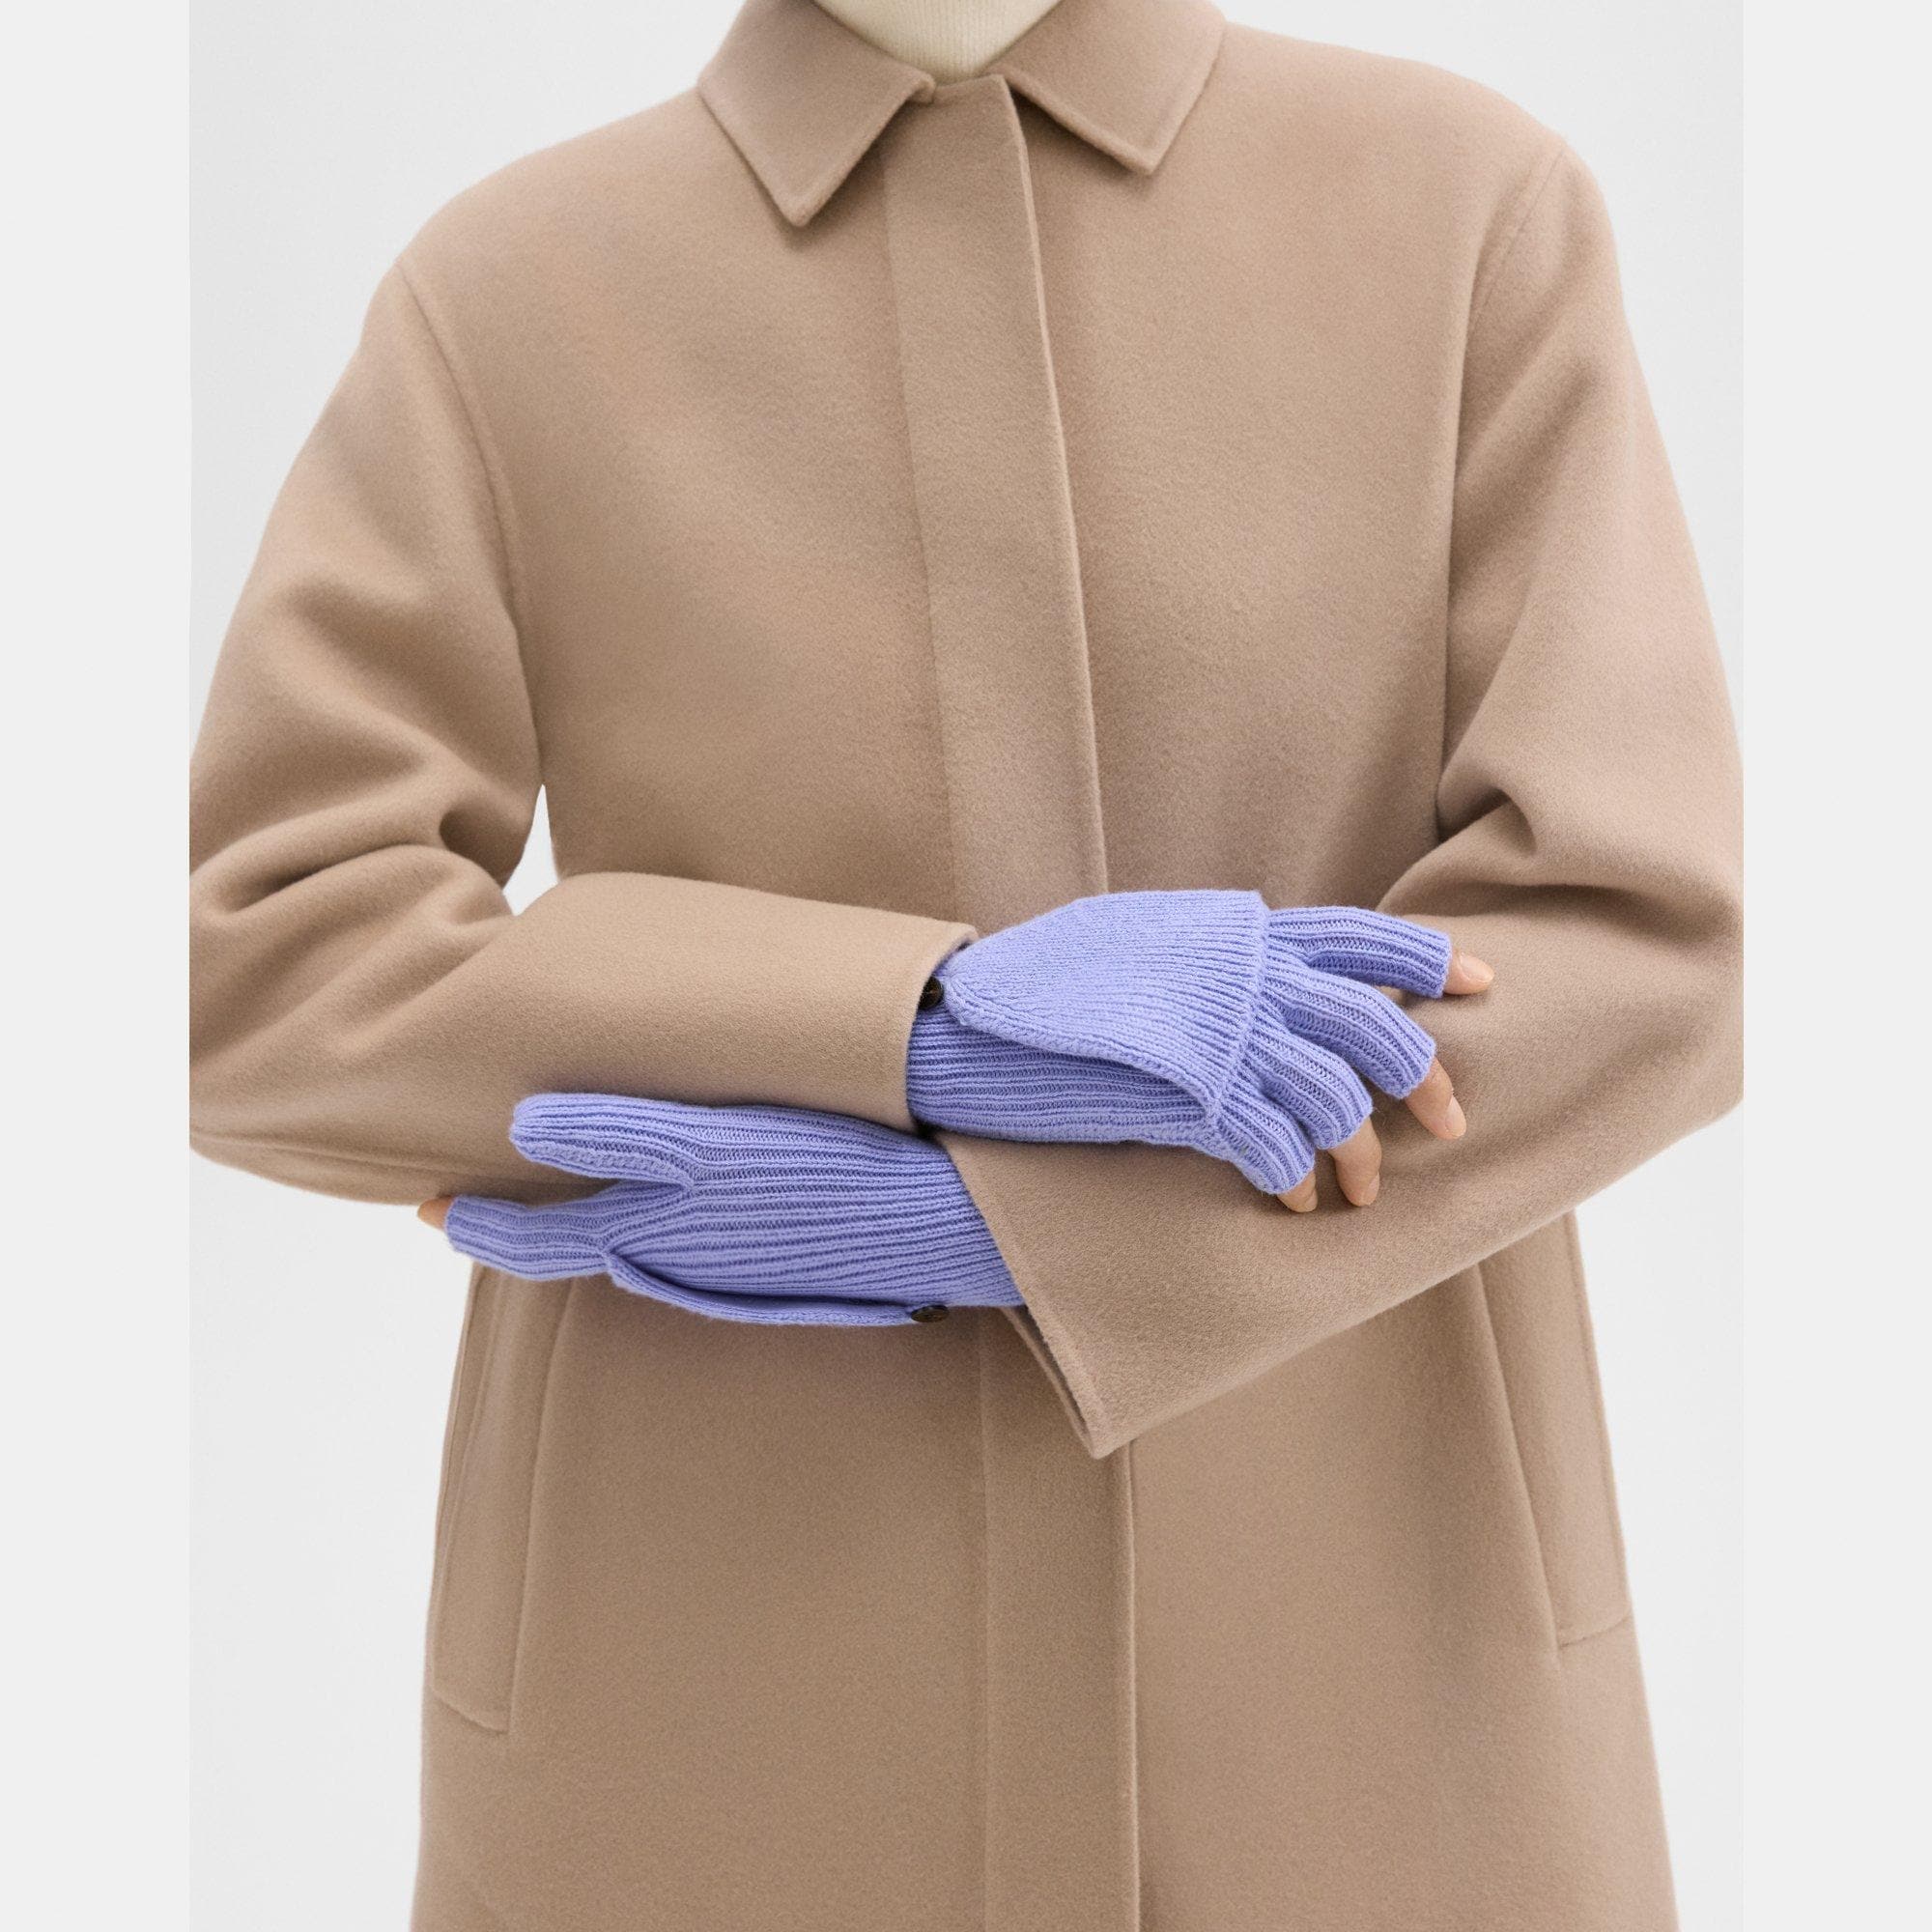 Theory Fold-Back Gloves in Cashmere